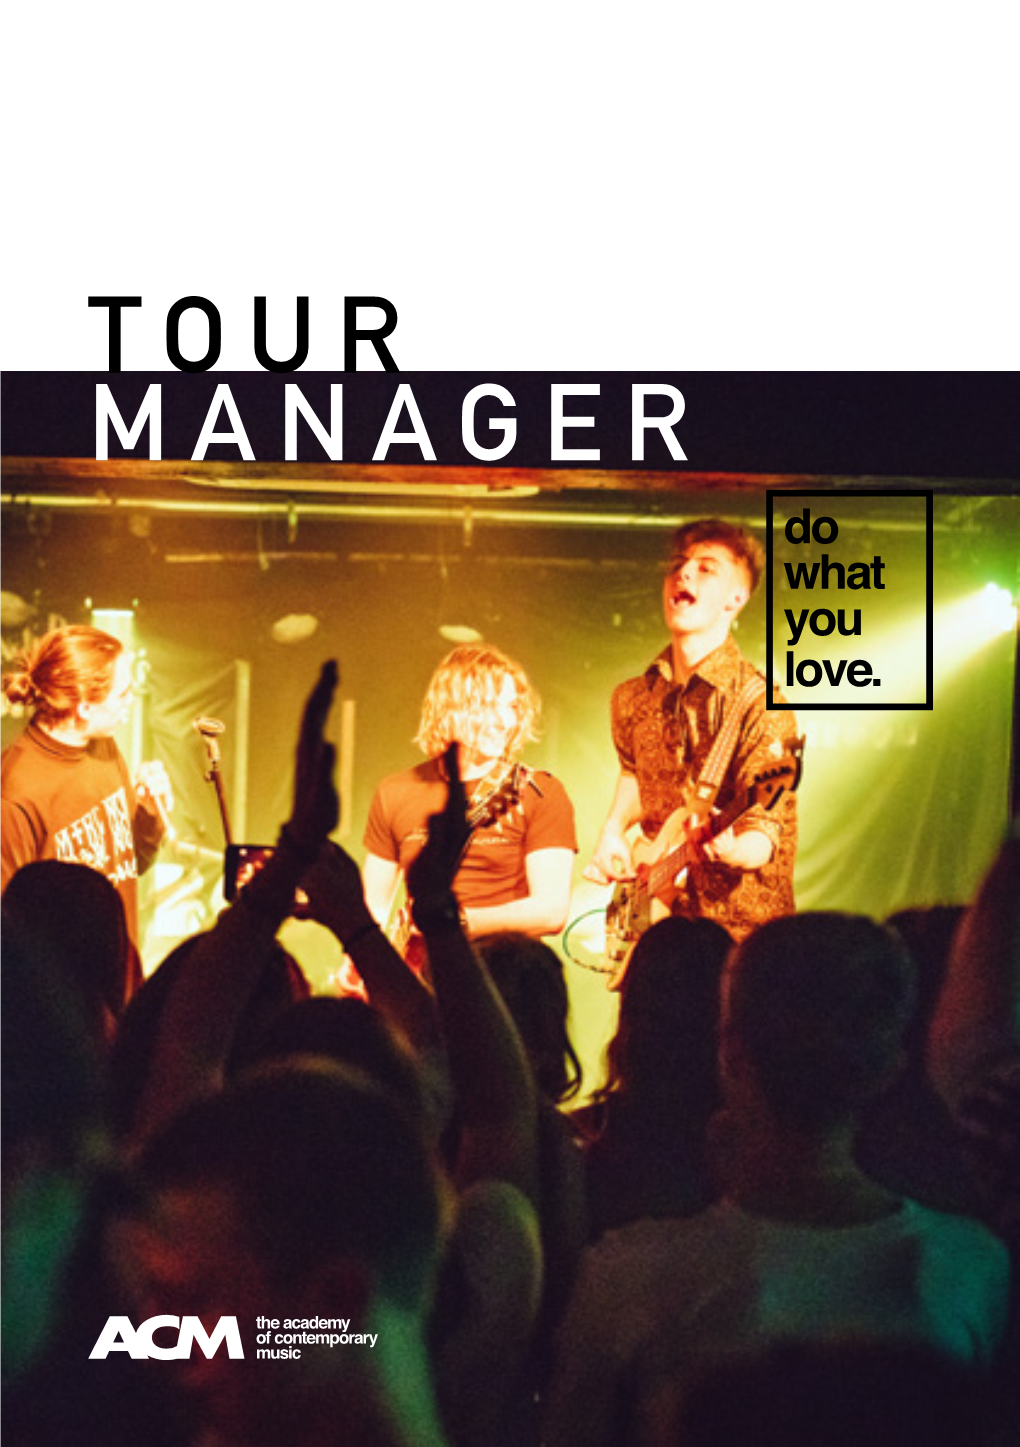 TOUR MANAGER Introduction